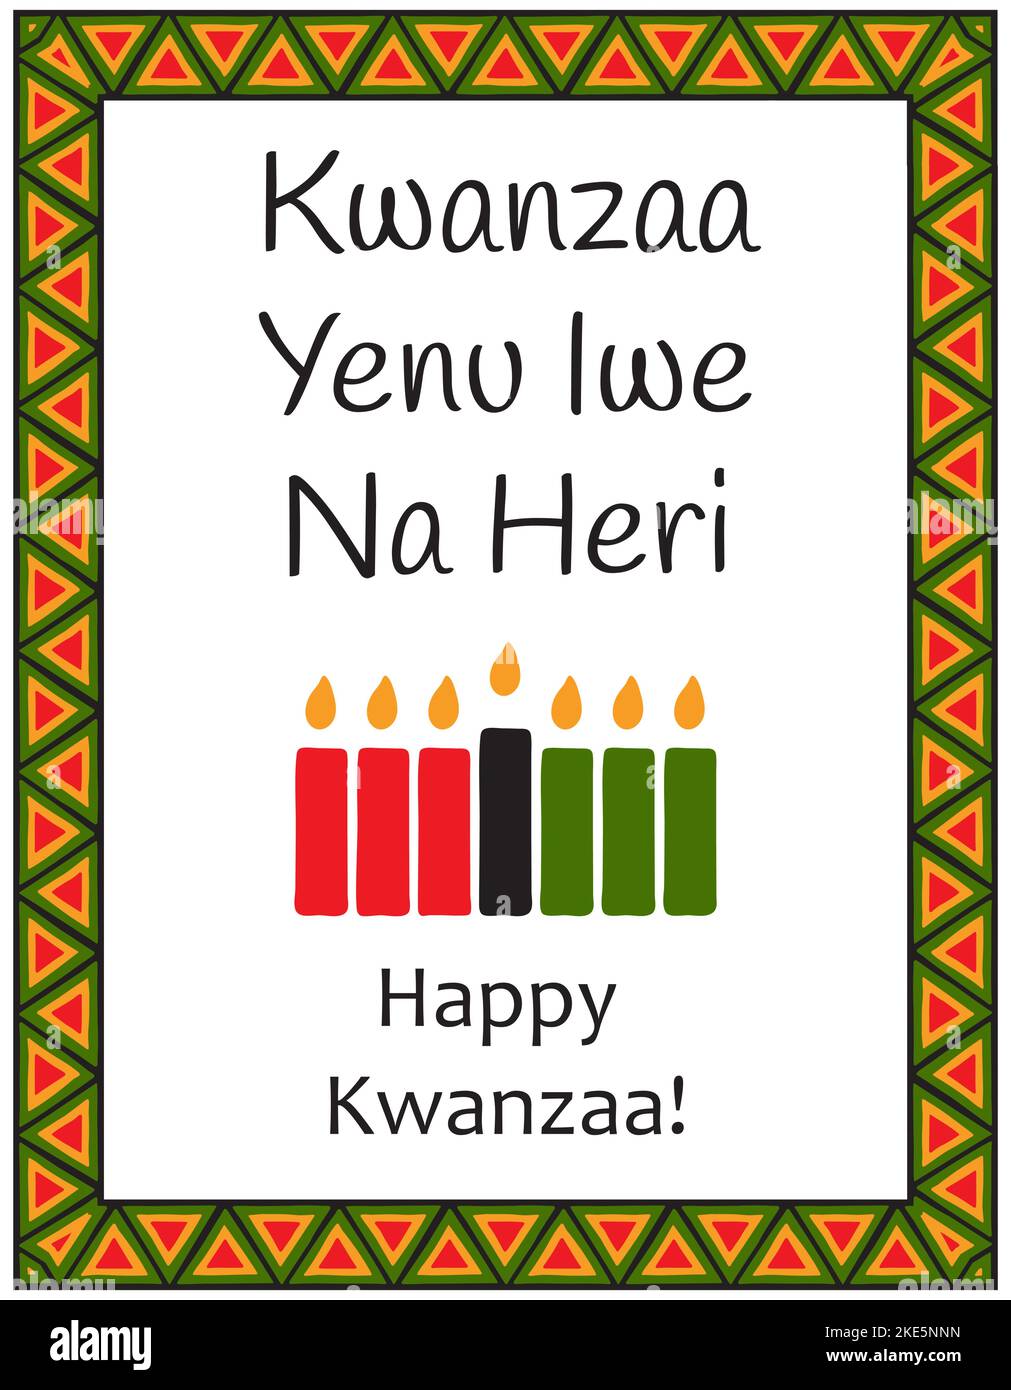 Card with traditional seven candles, symbols of Kwanzaa and Words - Kwanzaa Yenu Iwe Na Heri - Happy Kwanzaa in Swahili. Poster with ethnic African pa Stock Vector